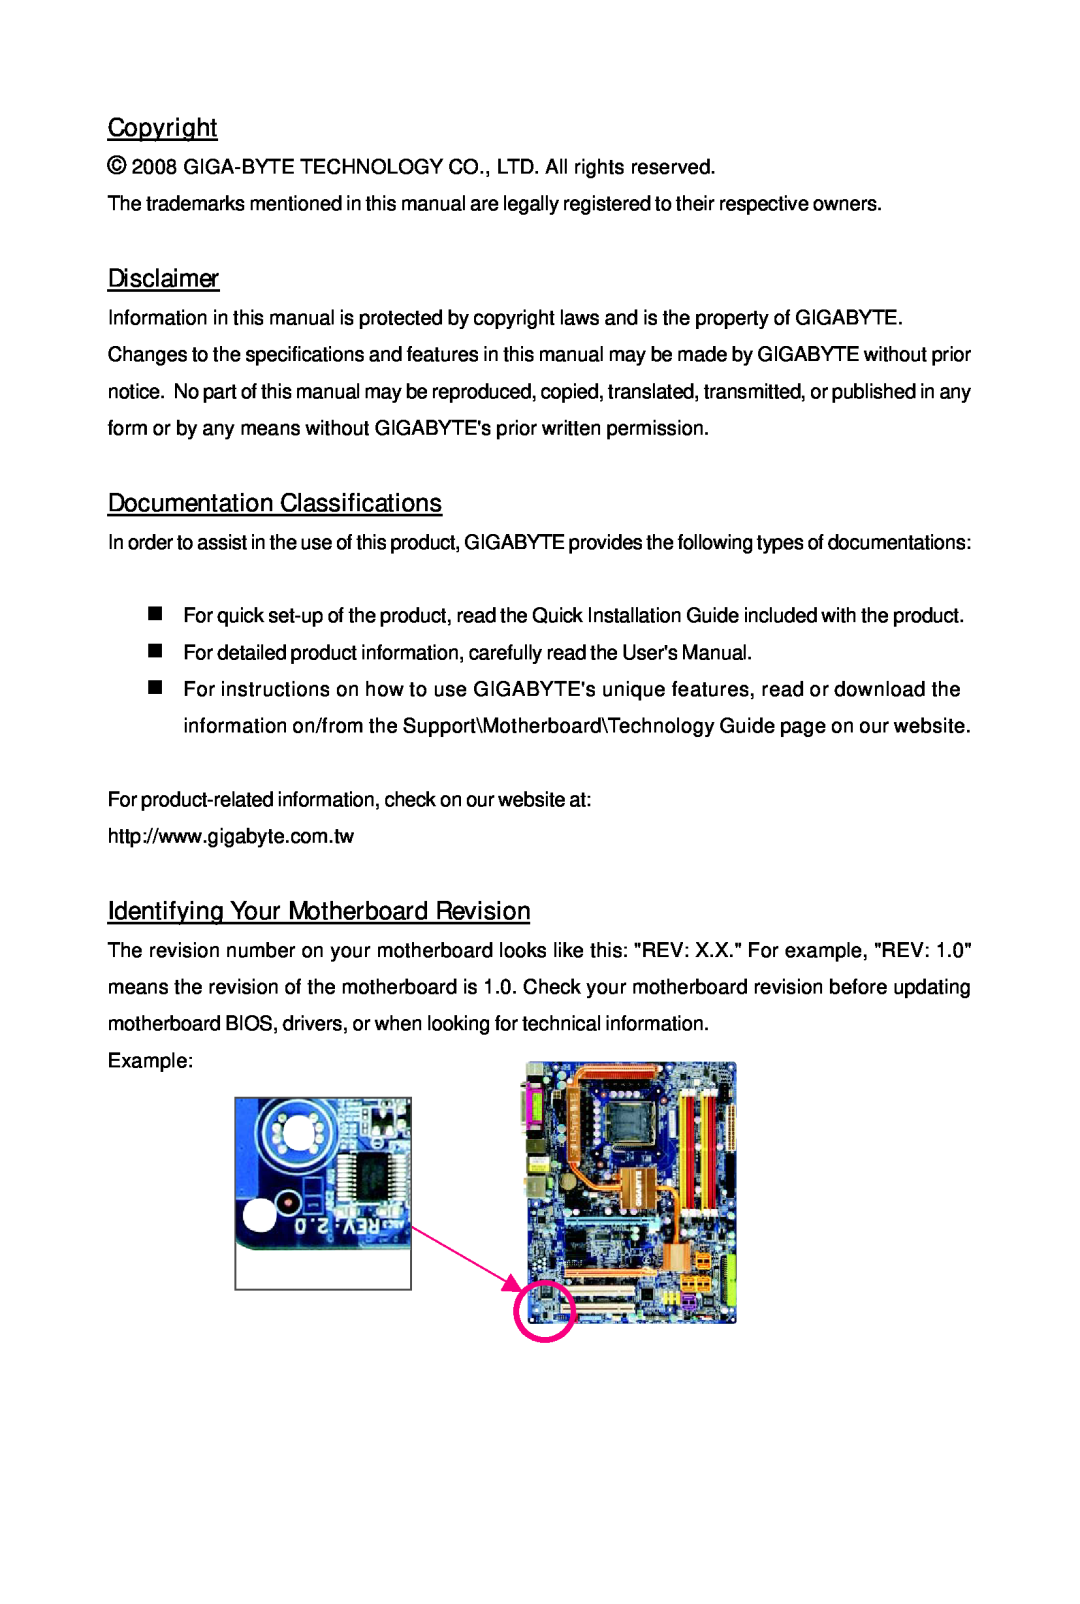 Gigabyte GA-EP45-UD3L Copyright, Disclaimer, Documentation Classifications, Identifying Your Motherboard Revision, Example 